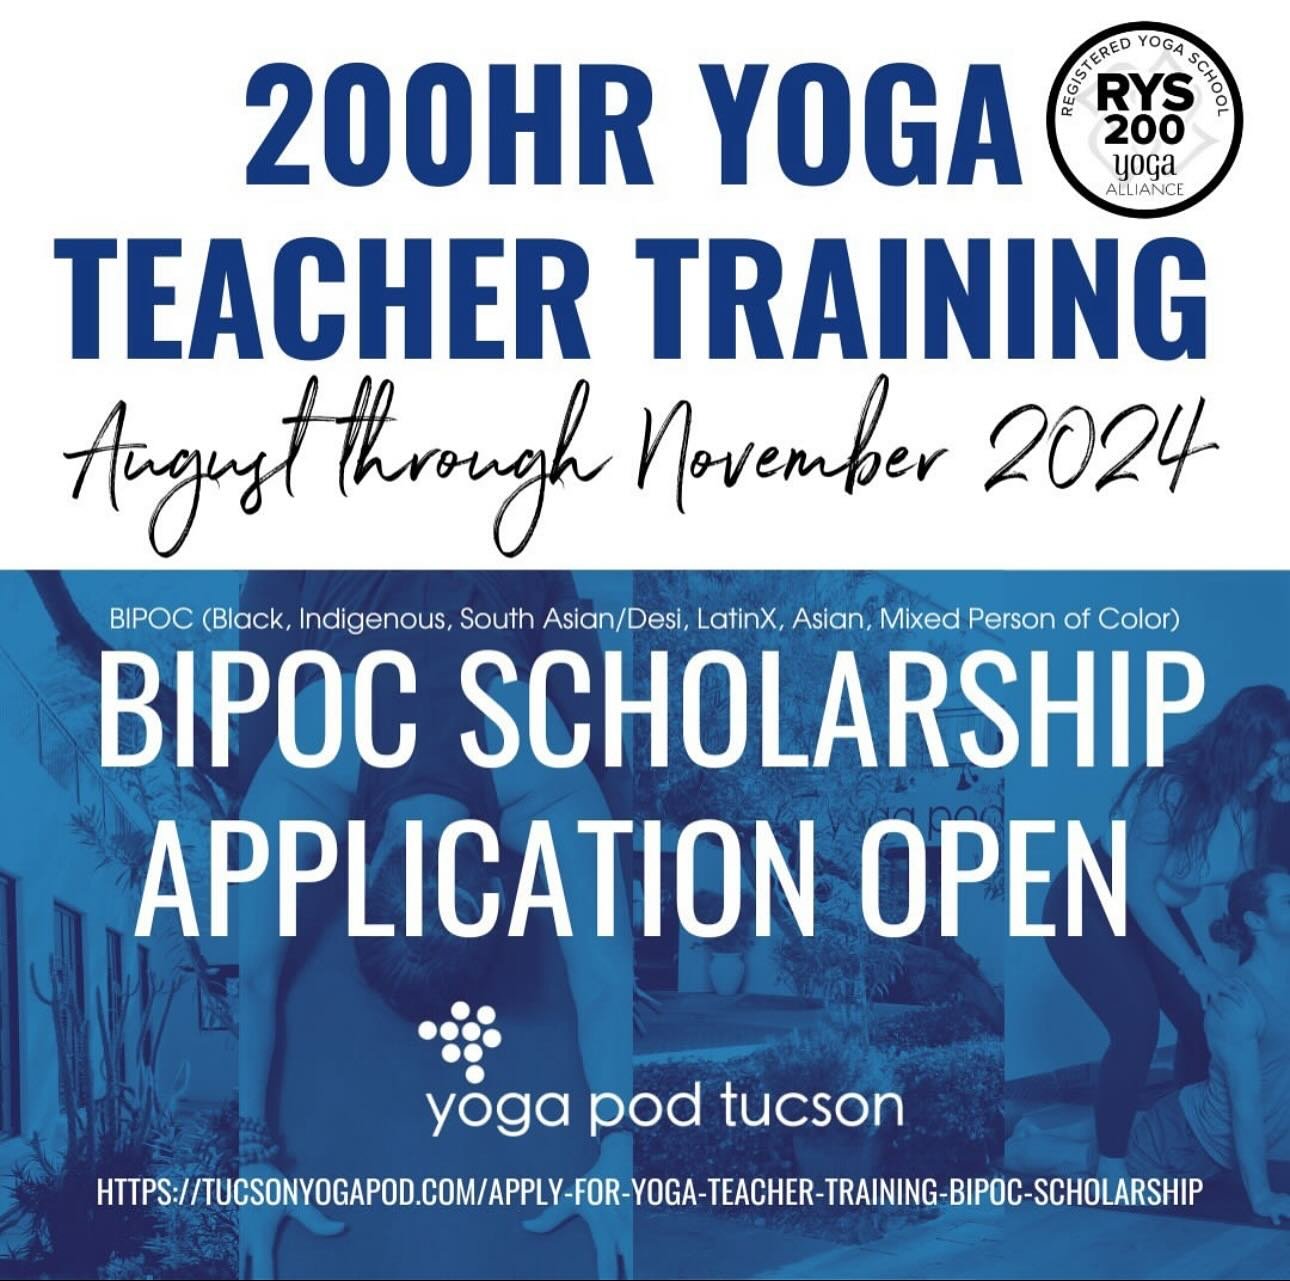 Gentle reminder that the application closes June 1st for our BIPOC Scholarships!! 💙 Head to https://tucsonyogapod.com/apply-for-yoga-teacher-training-bipoc-scholarship 🥳 Not interested in a scholarship but still interested in teacher training?? DM 